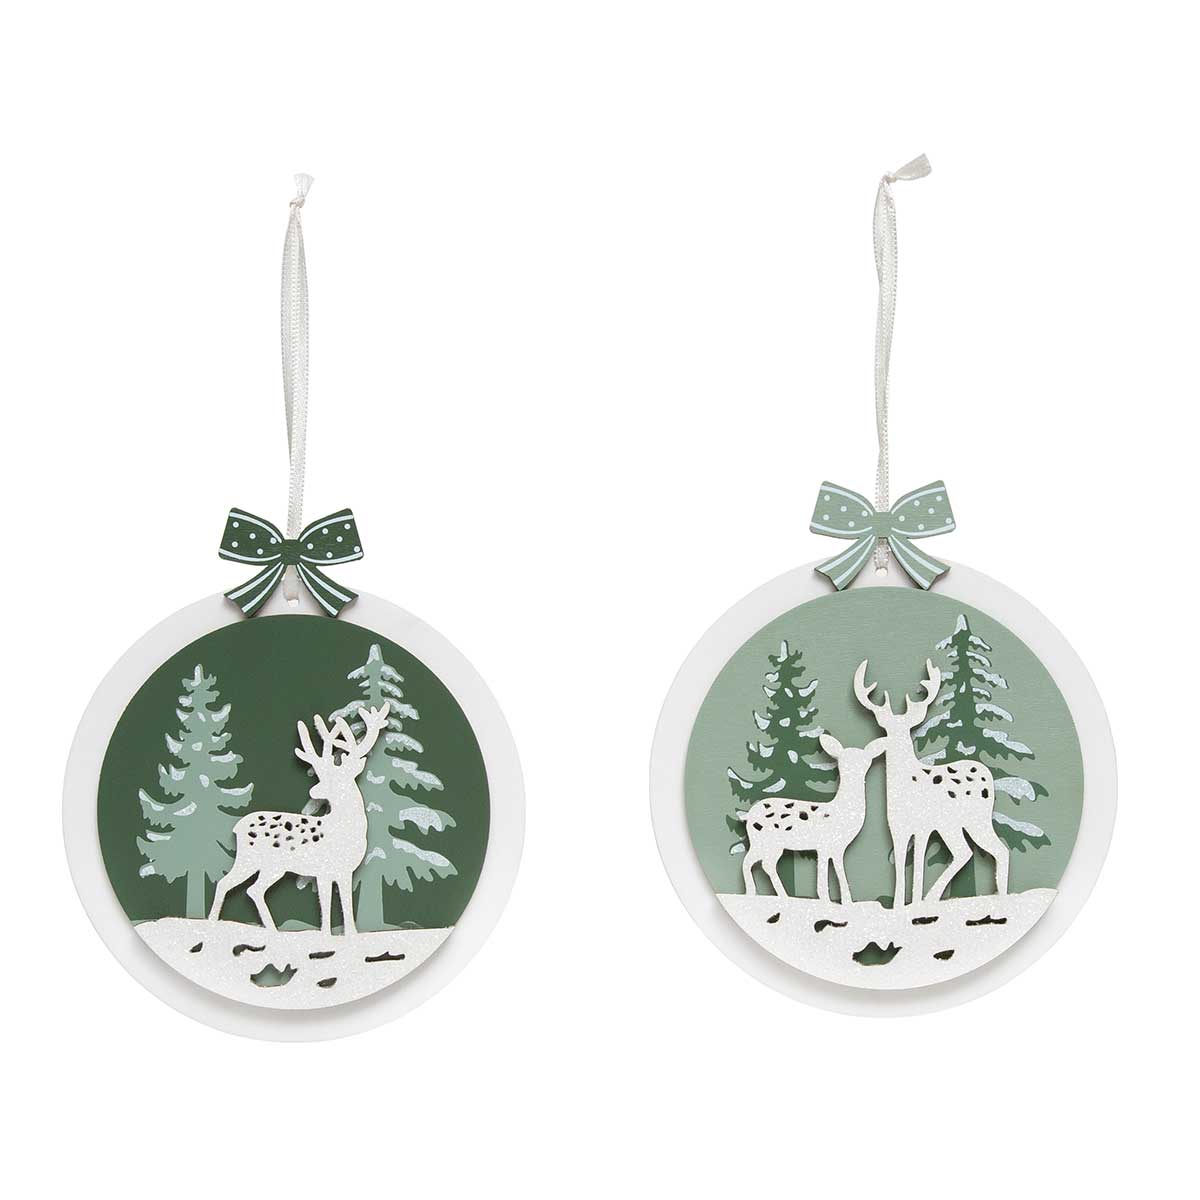 !DEER ROUND ORNAMENT GREEN/WHITE 2 AST